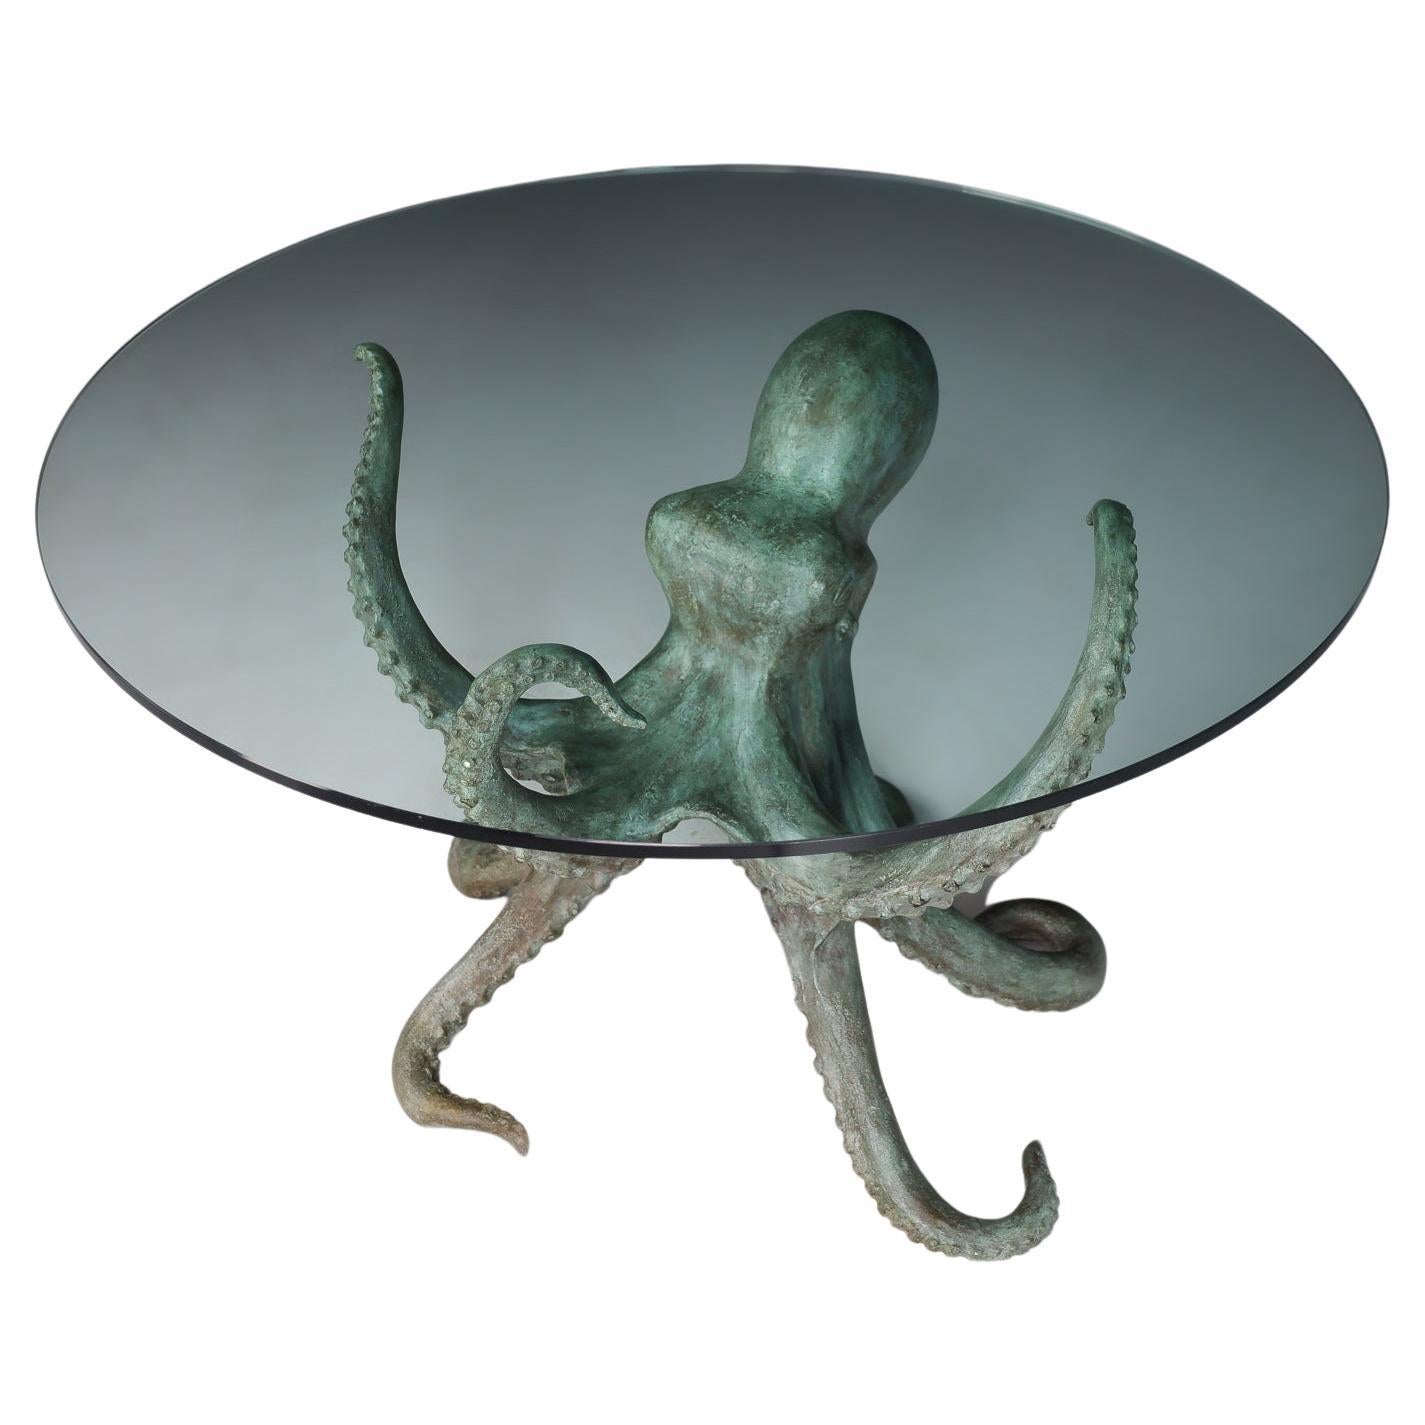 Patinated Bronze Octopus Table or Sculpture, 1970s Italy